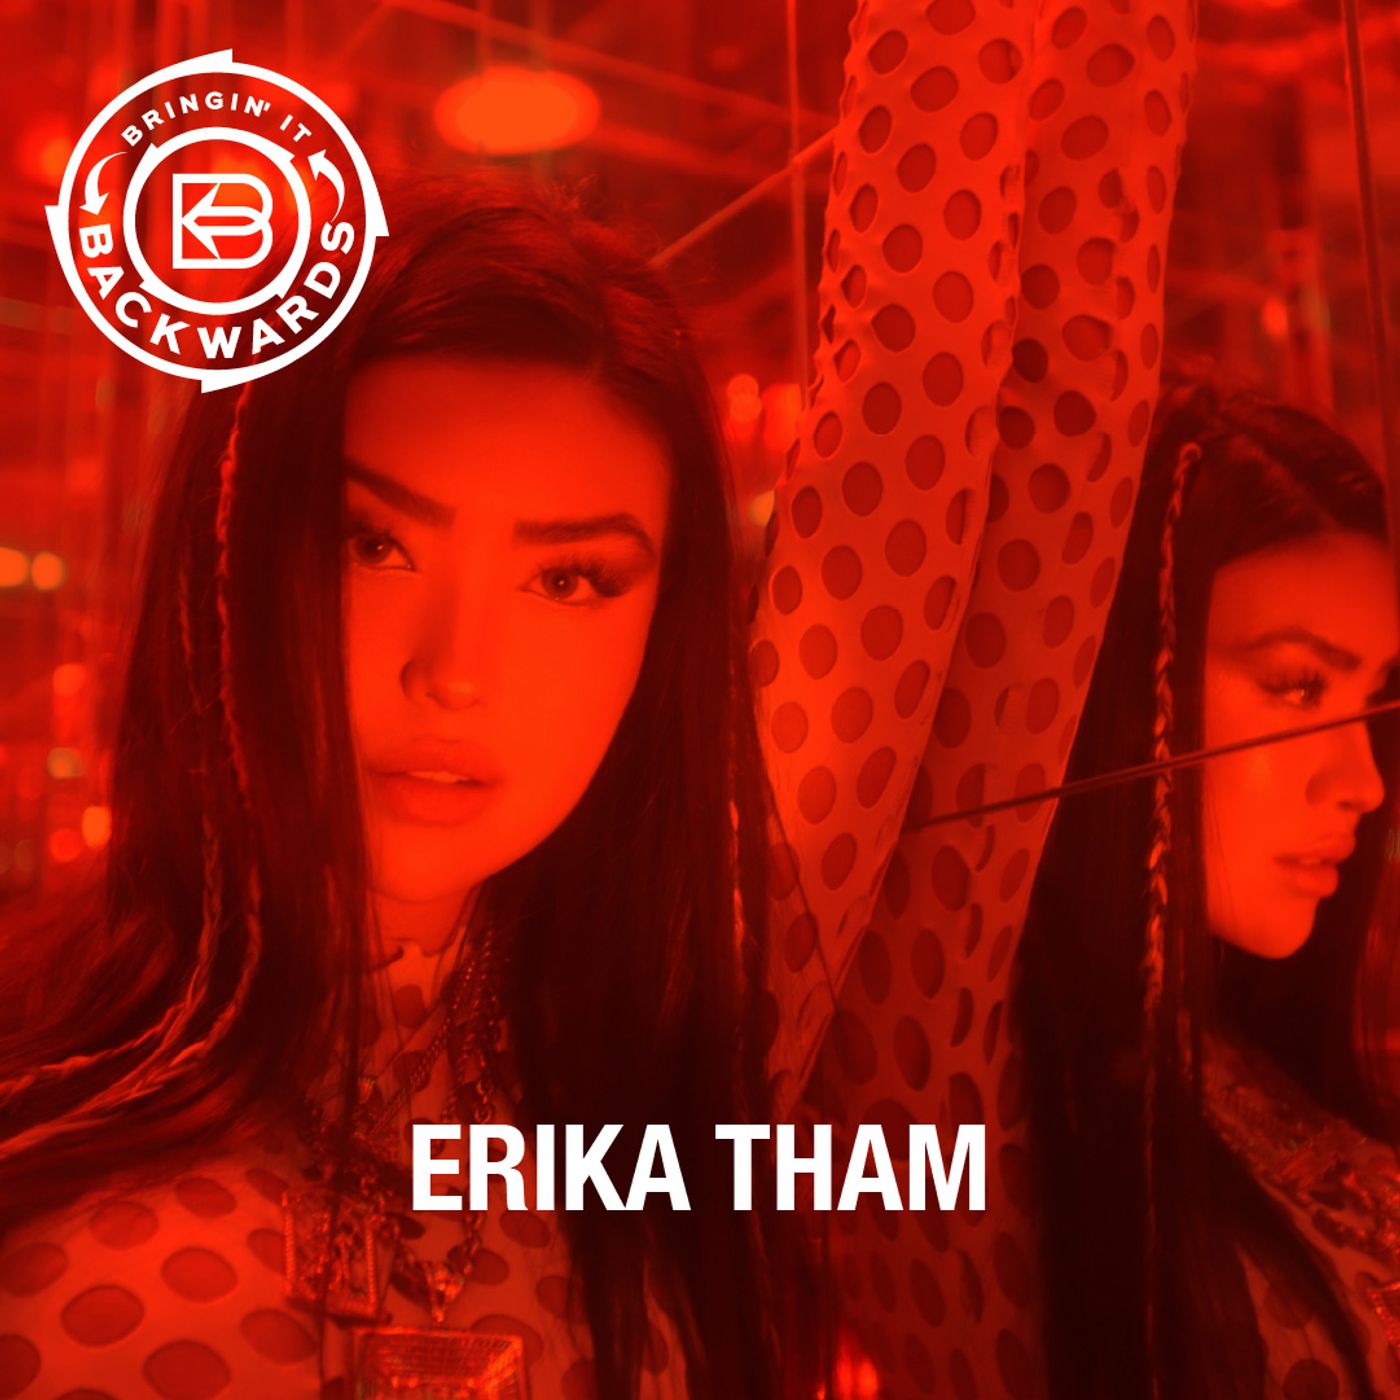 Interview with Erika Tham Image